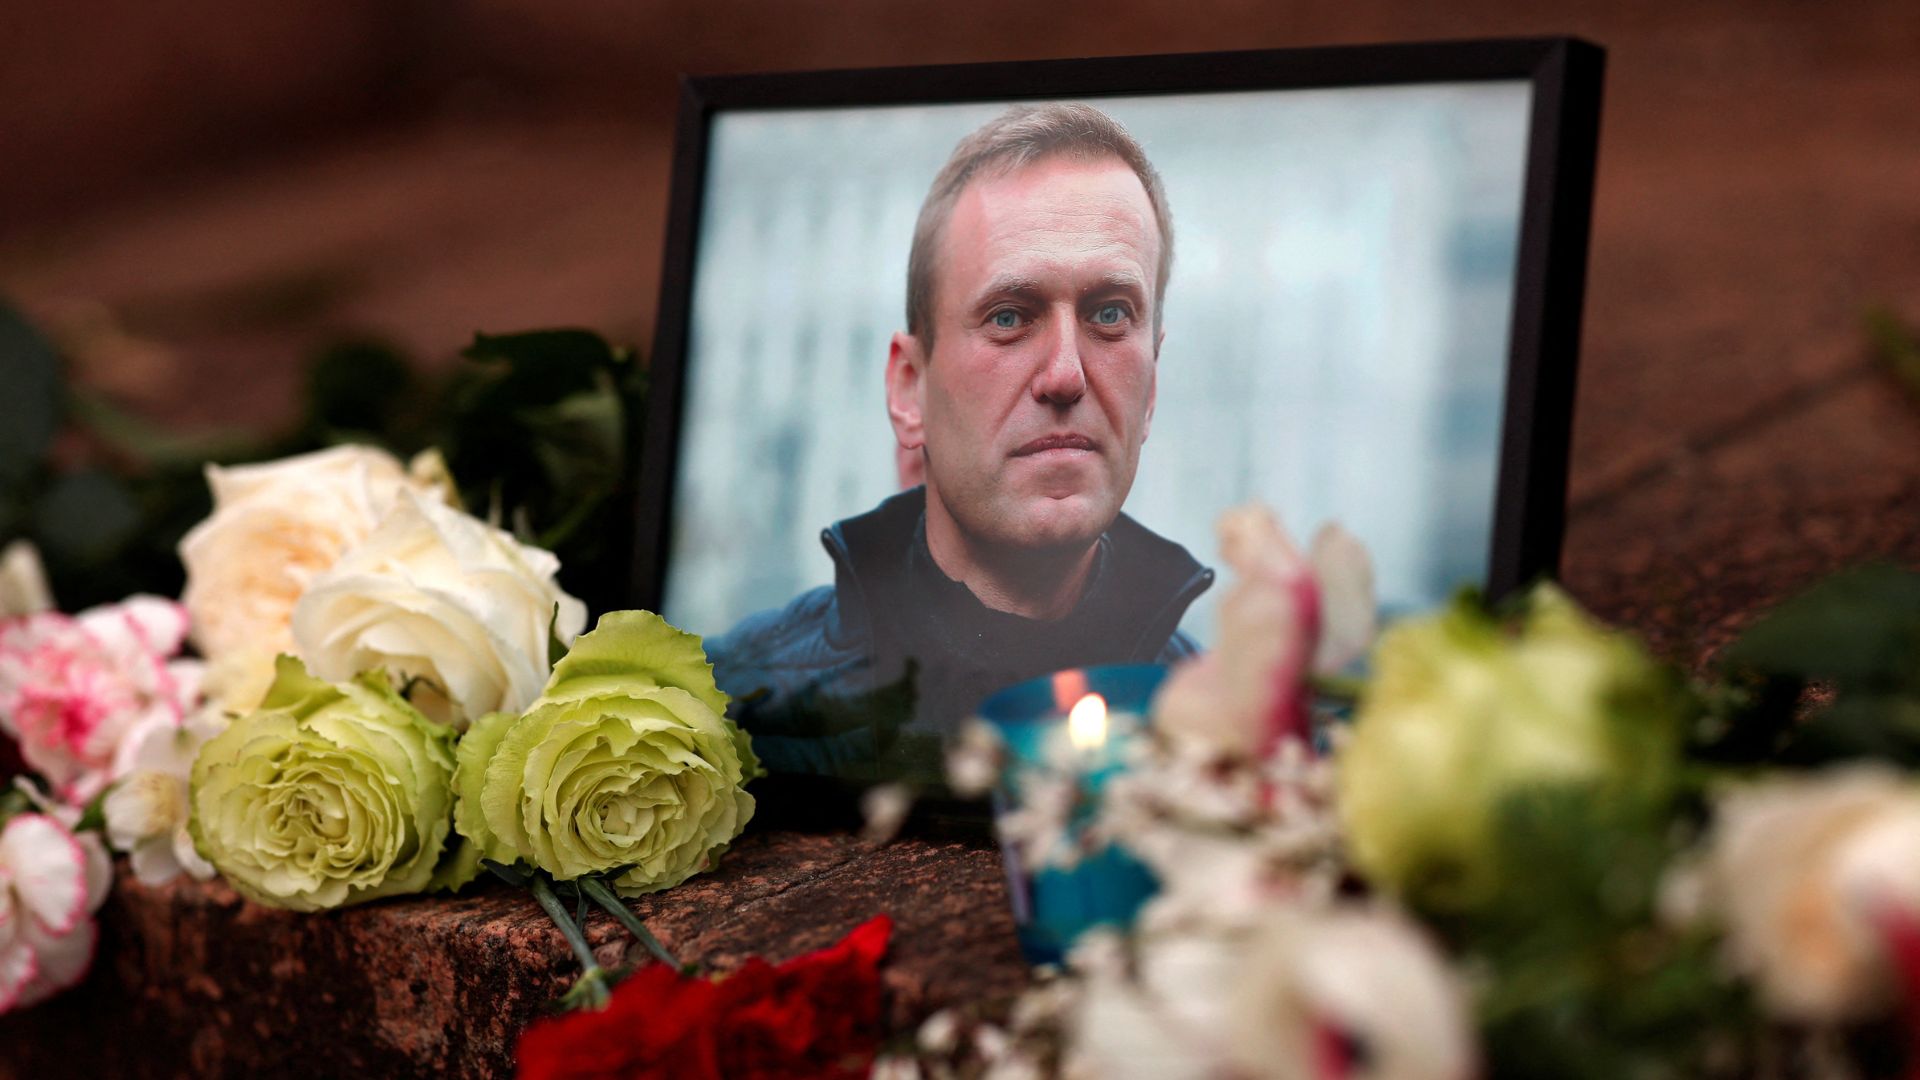 Flowers and a candle are placed next to a portrait of Navalny in Paris, France. /Gonzalo Fuentes/Reuters